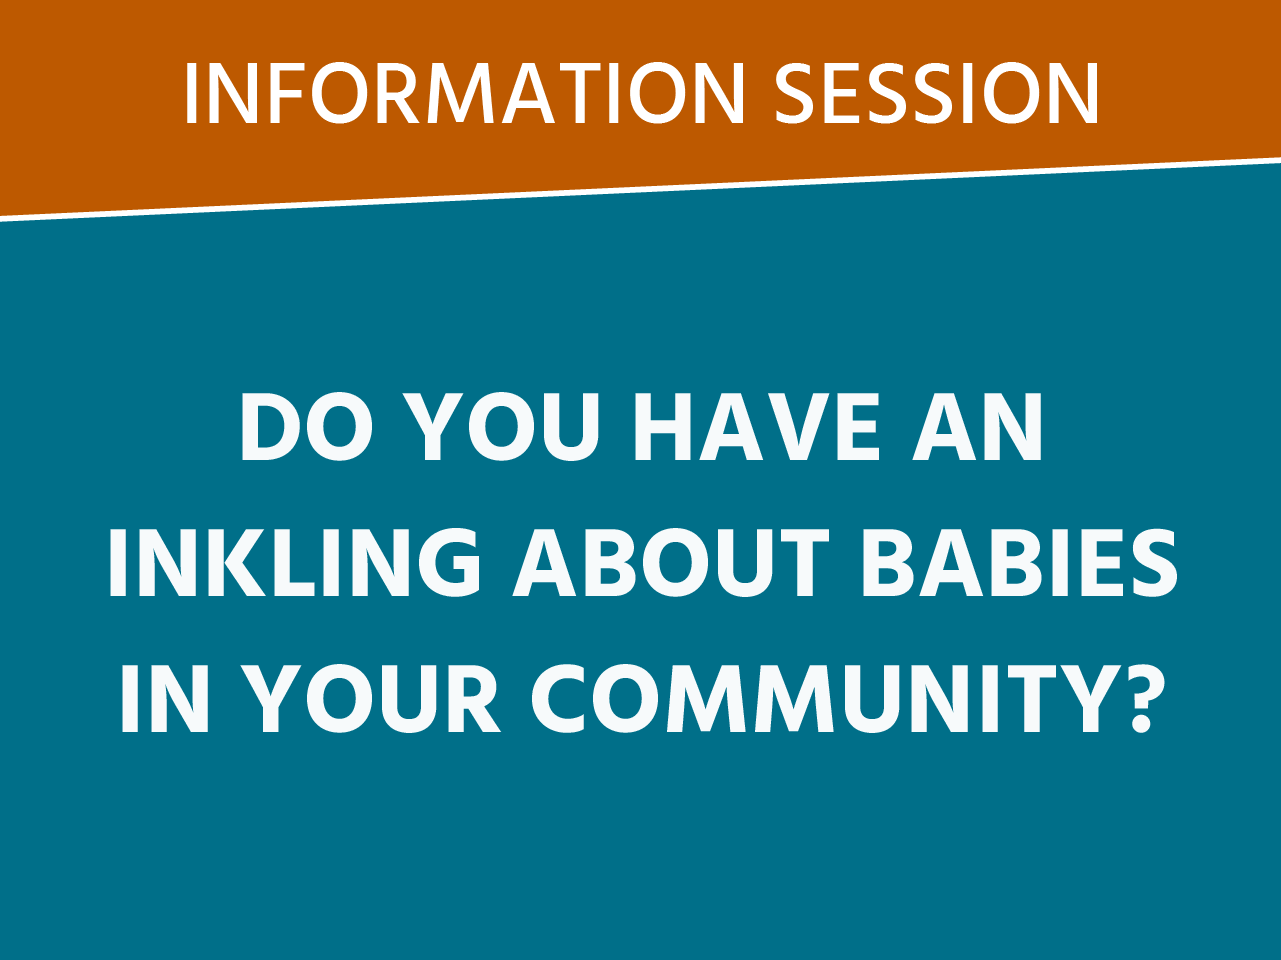 Do you have an Inkling about babies in your community?